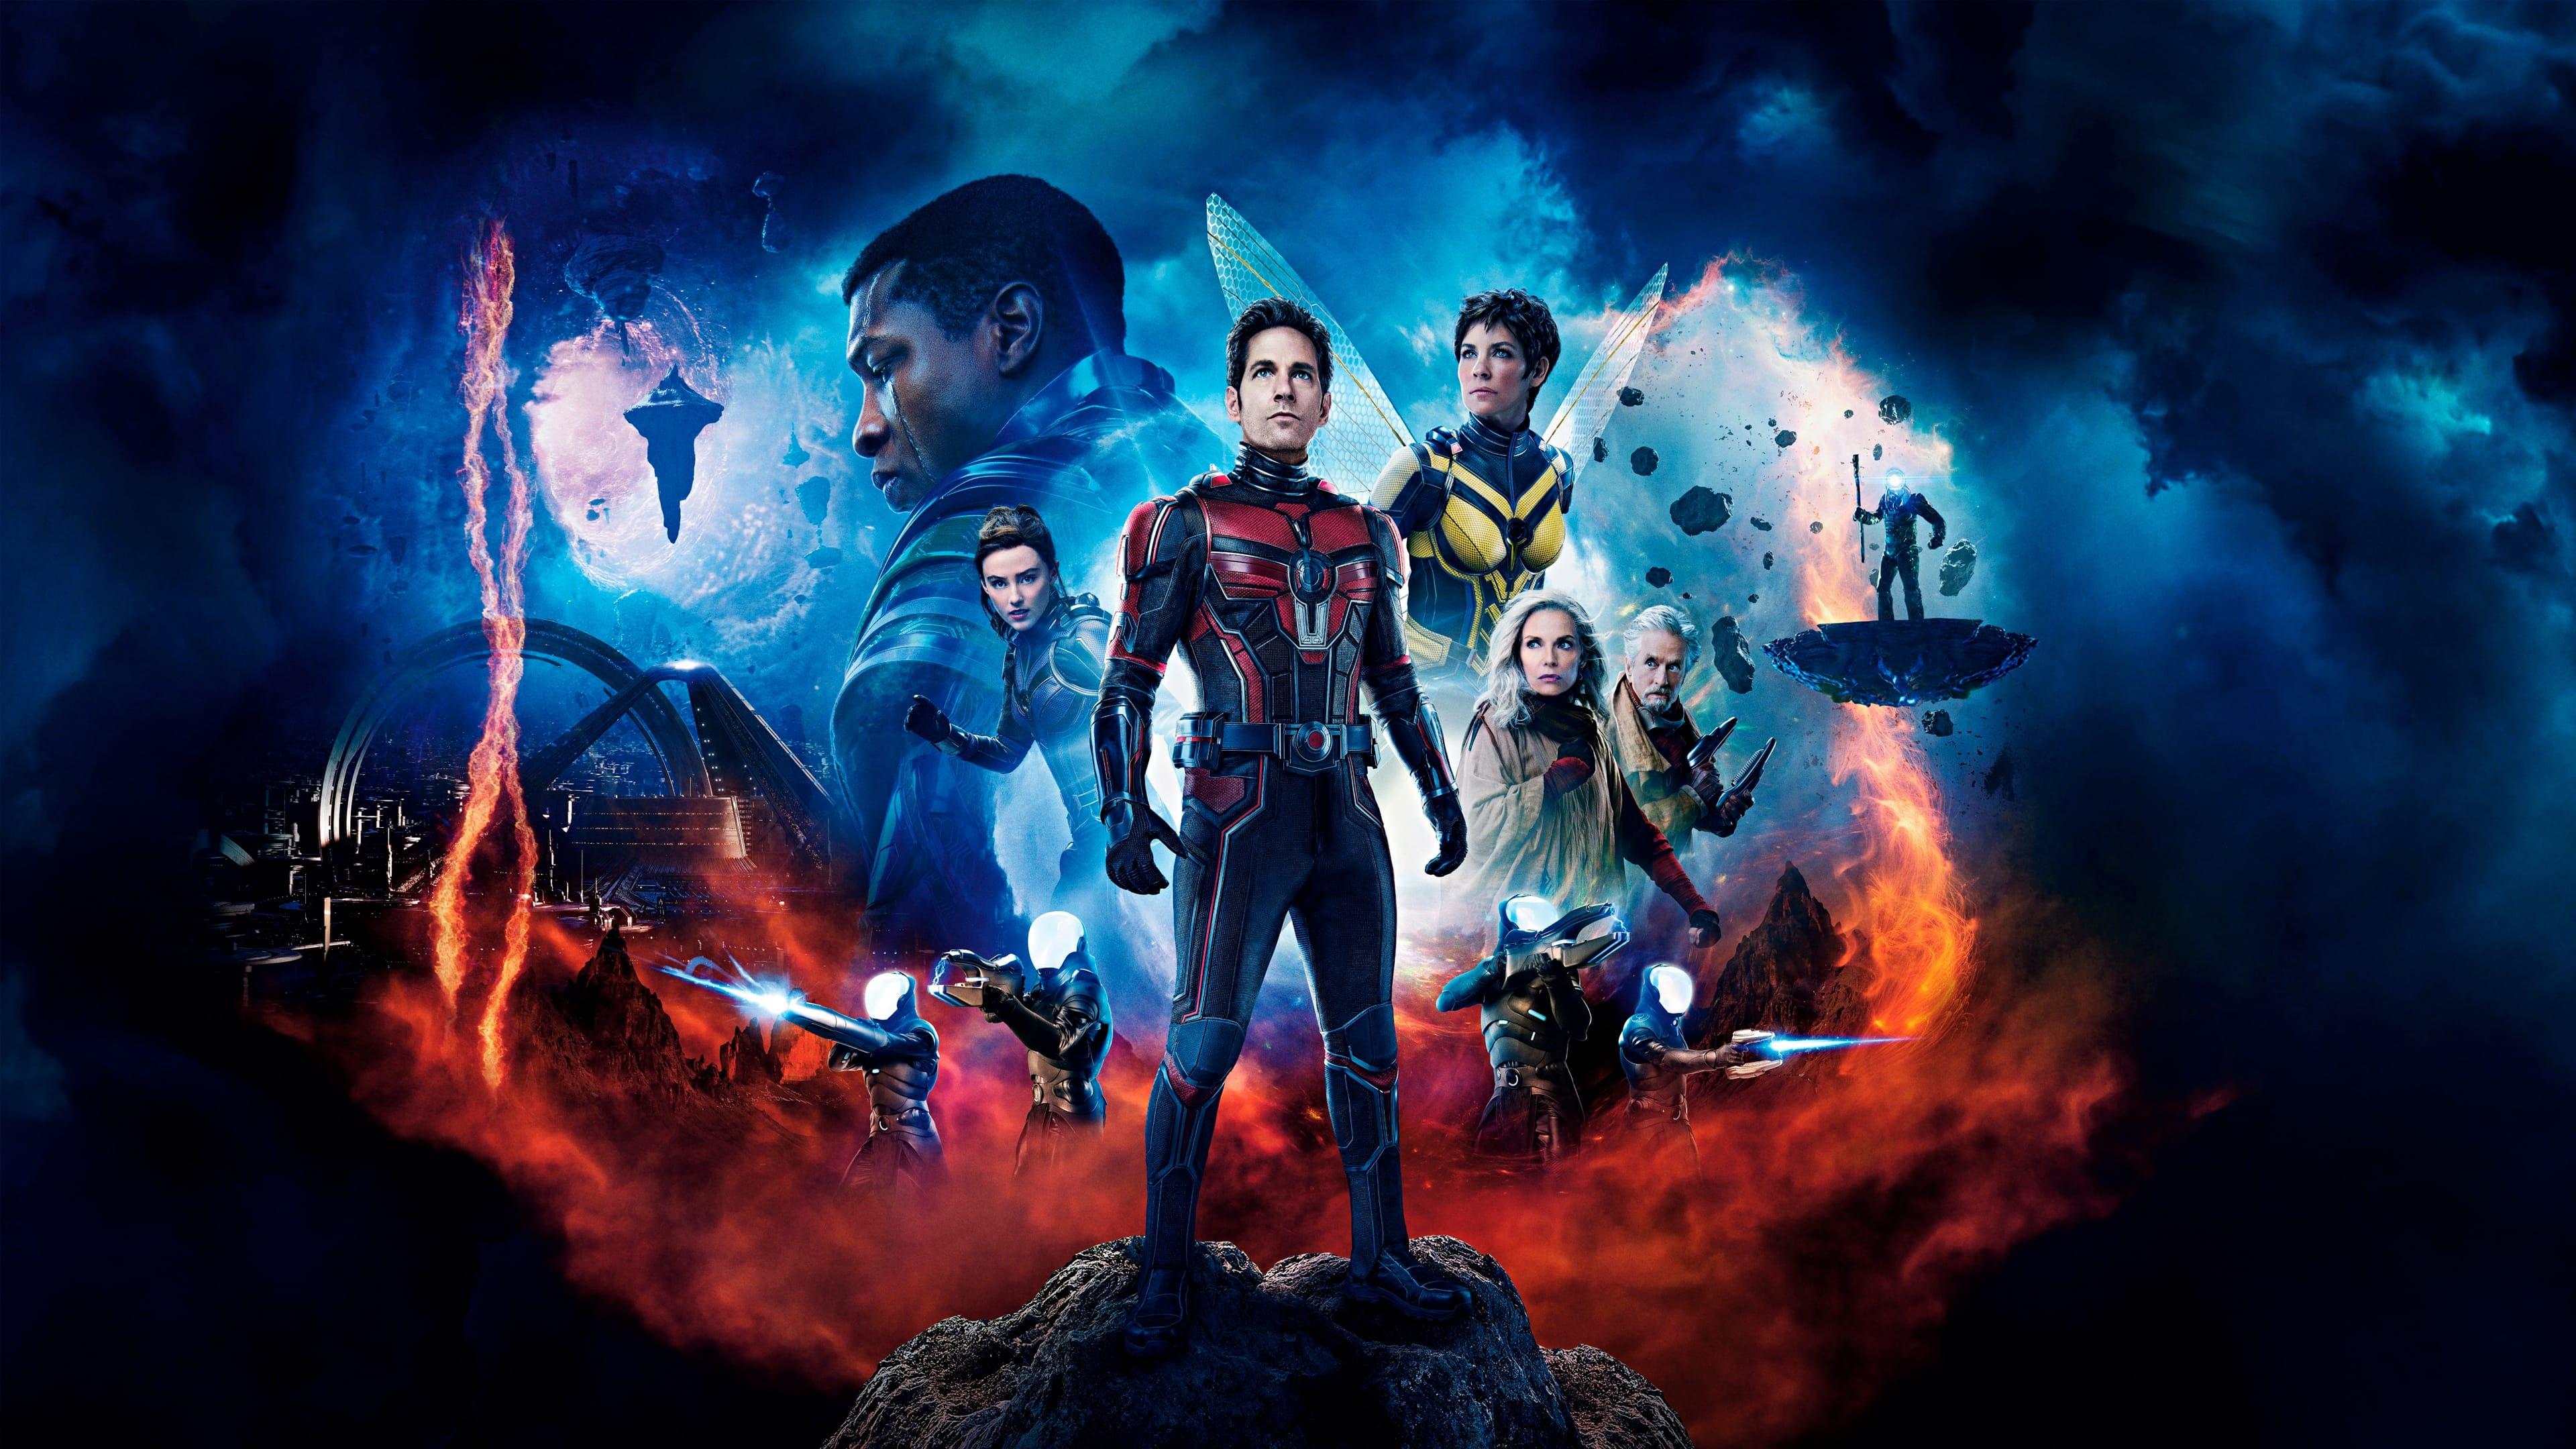 Ant-Man and The Wasp: Quantumania releases Friday, February 17th, 2023.